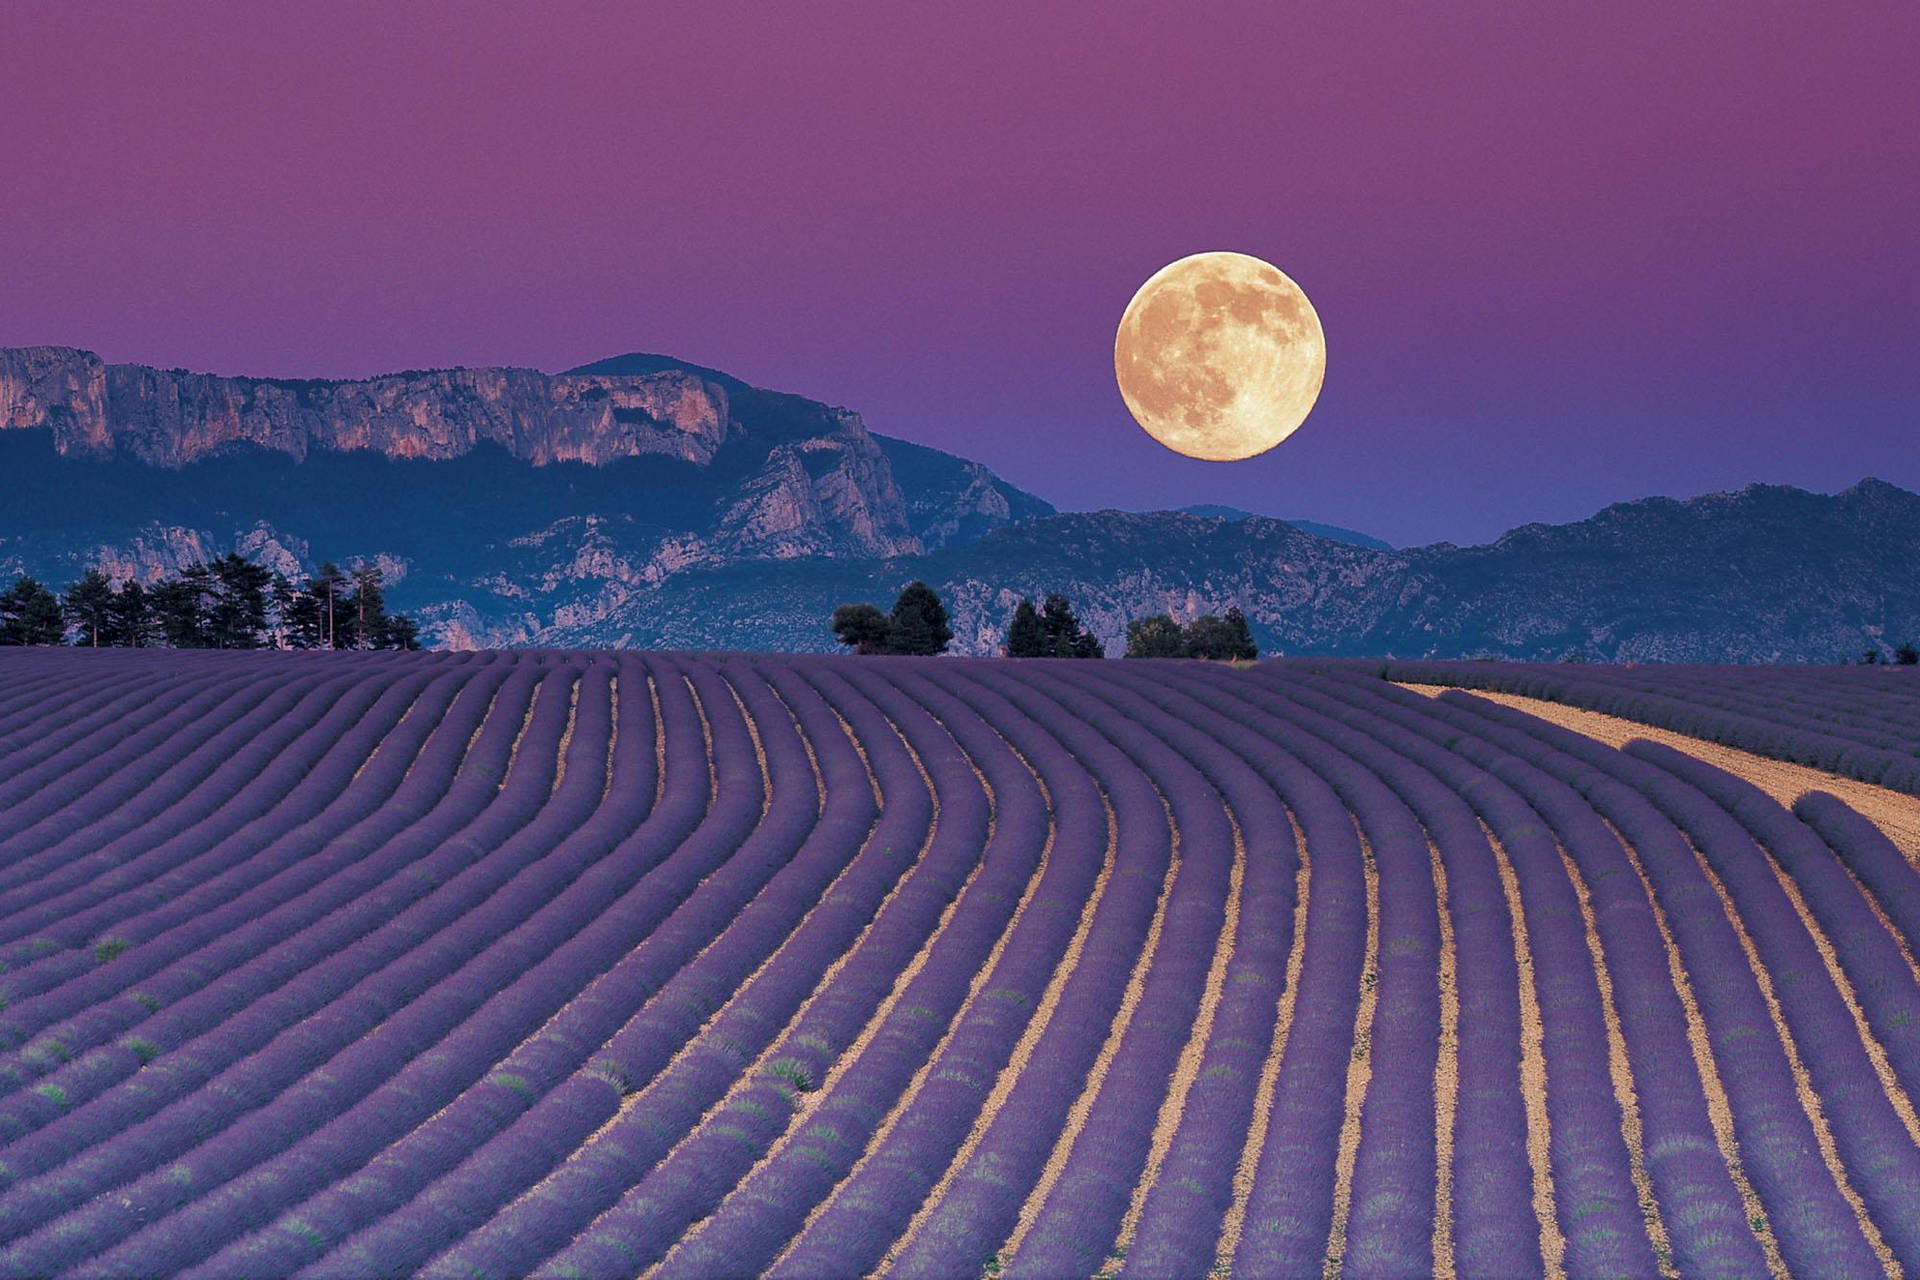 Lavender Aesthetic Field And A Full Moon Background